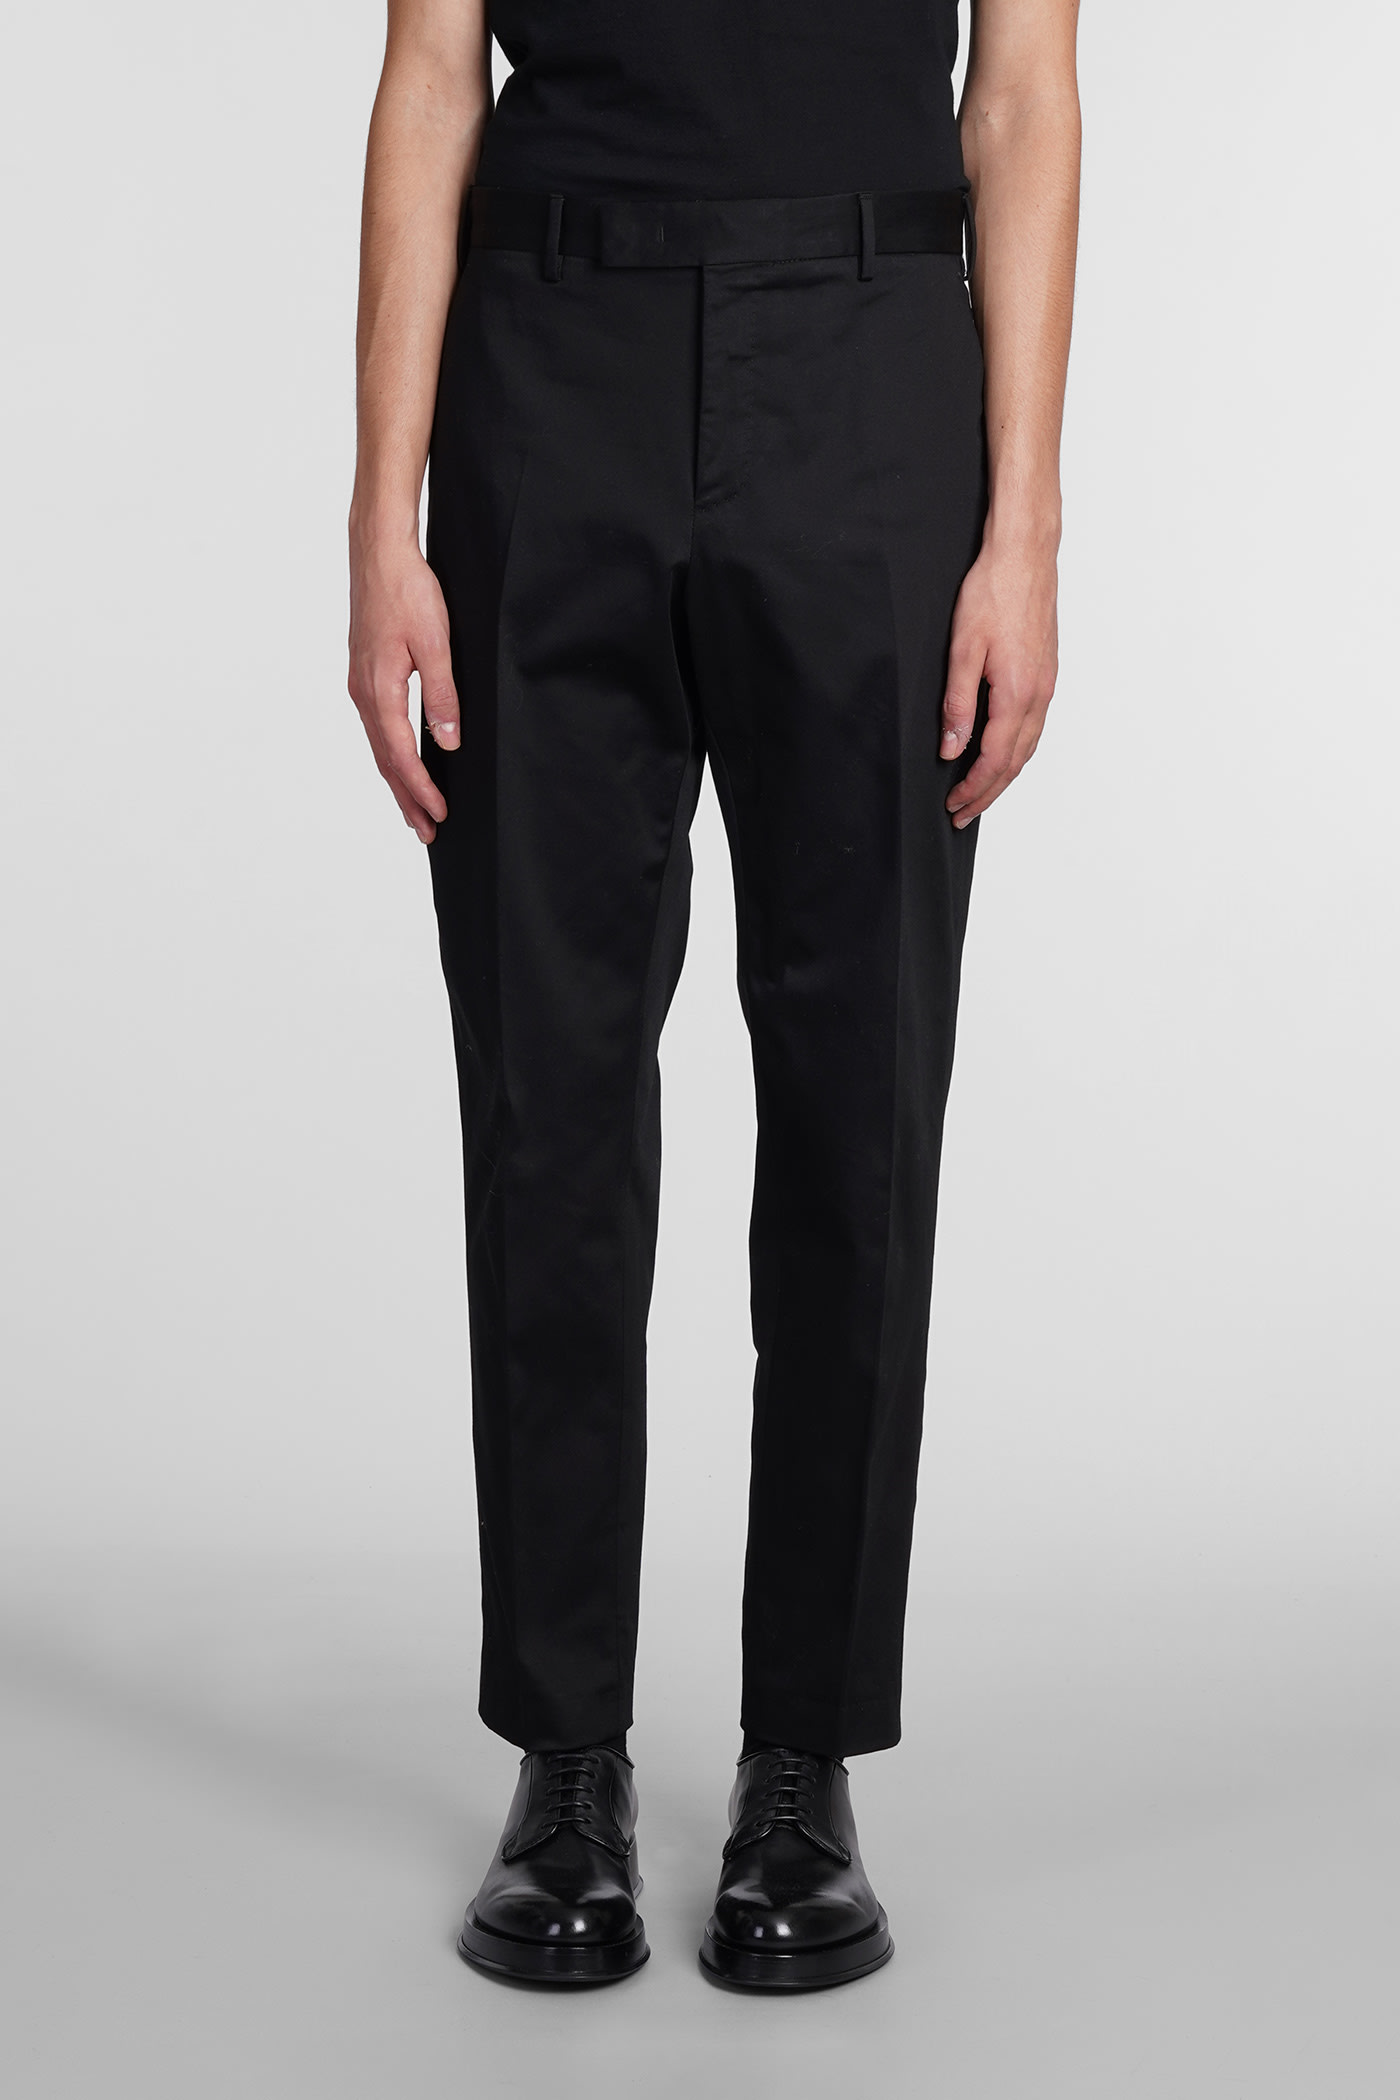 Pt01 Trousers In Black Cotton